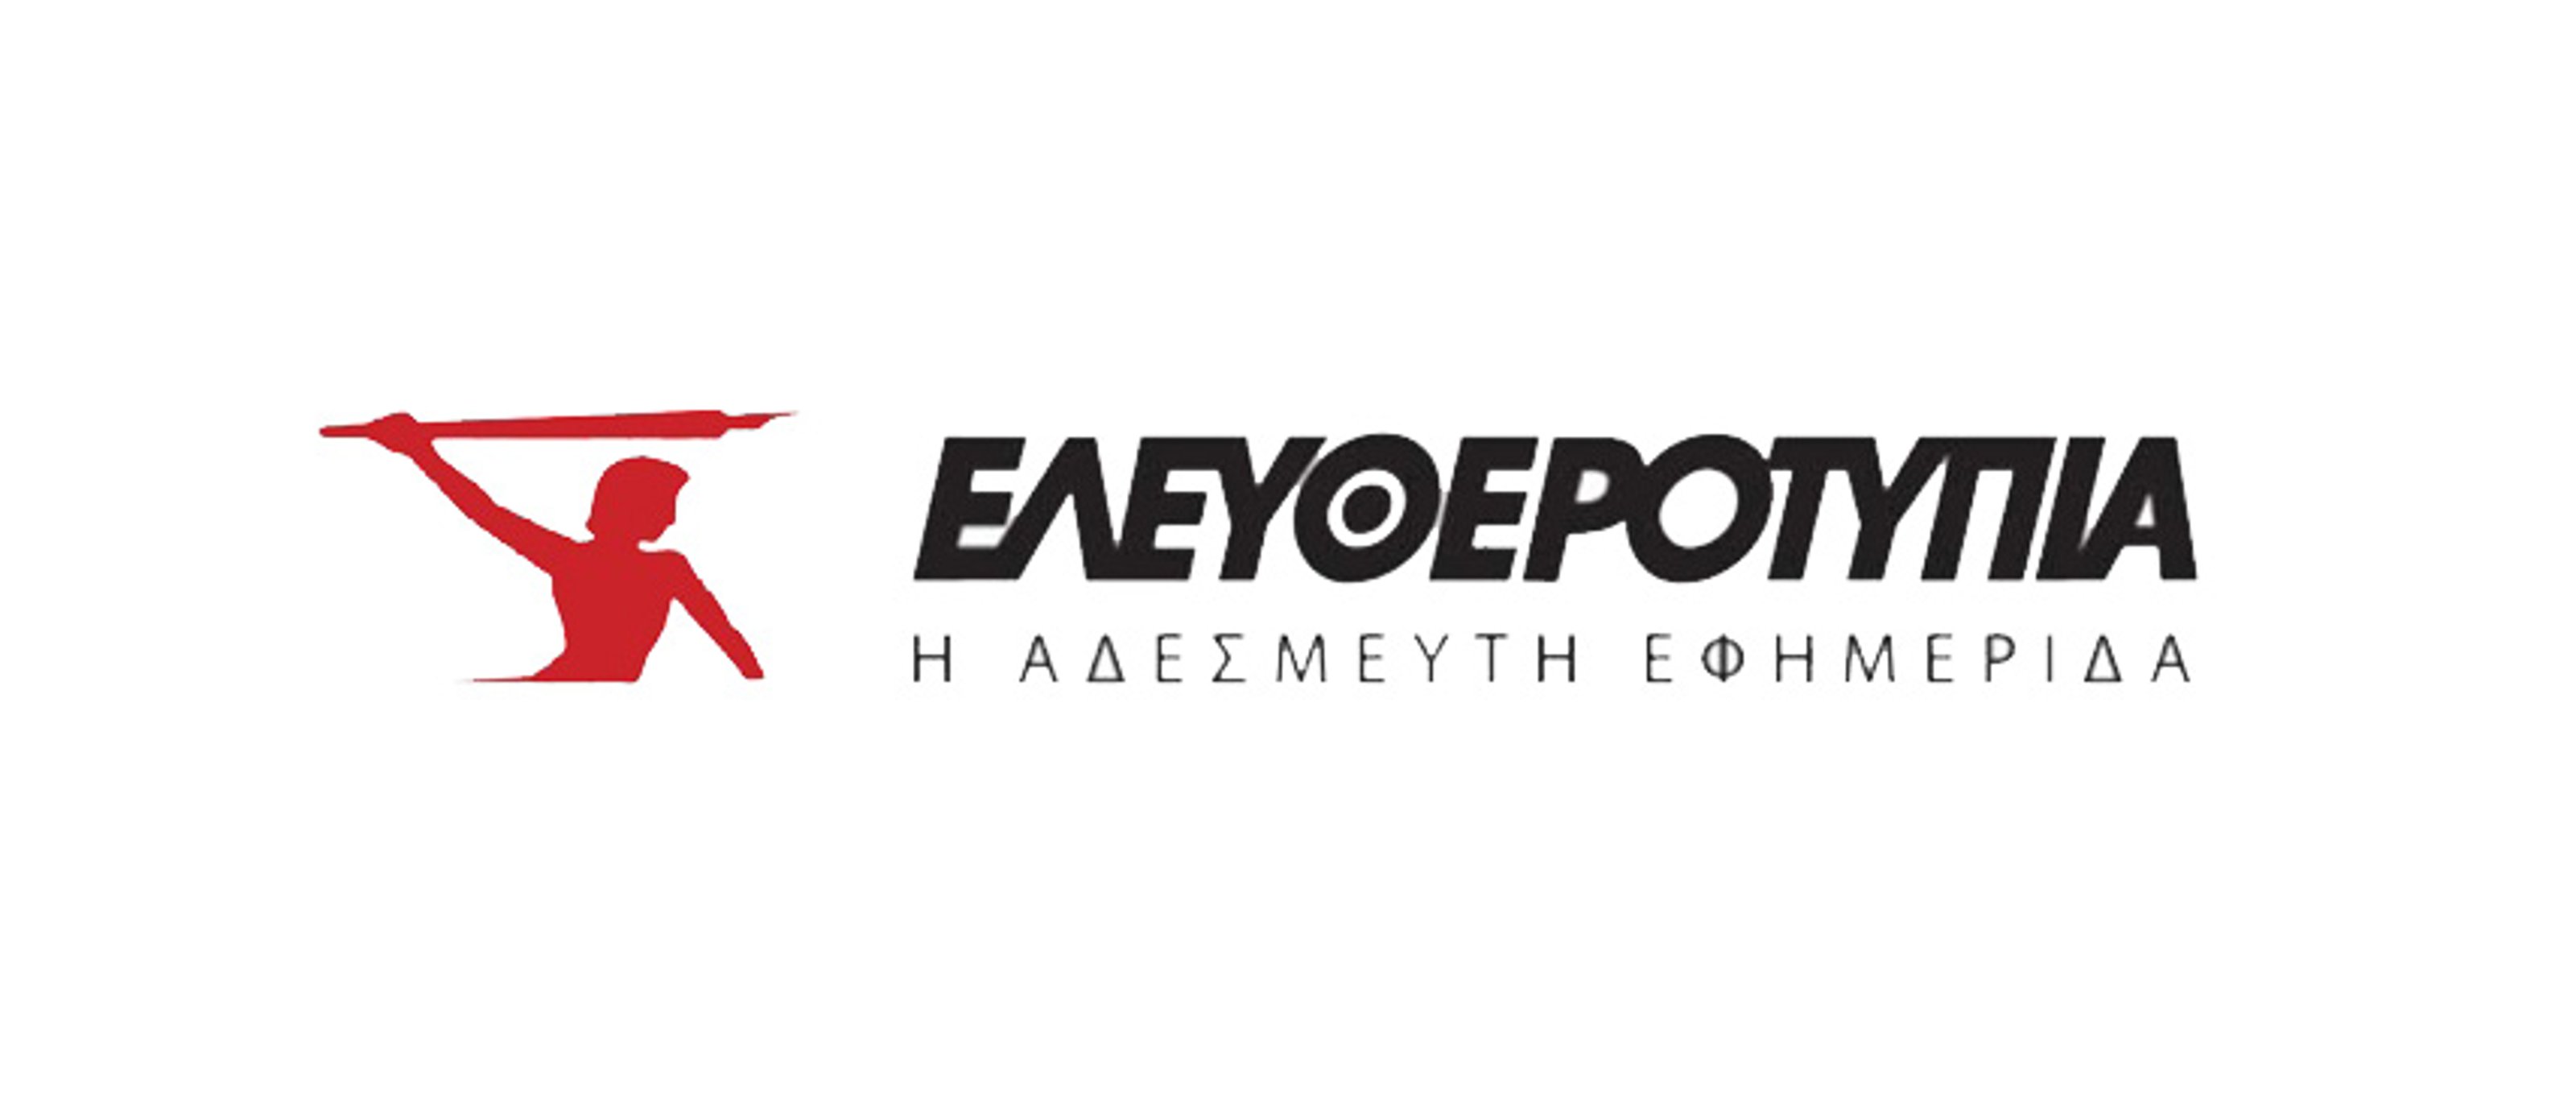 Elefterotypia slogan image, a red figure holding up a pen, the subtitle translates to 